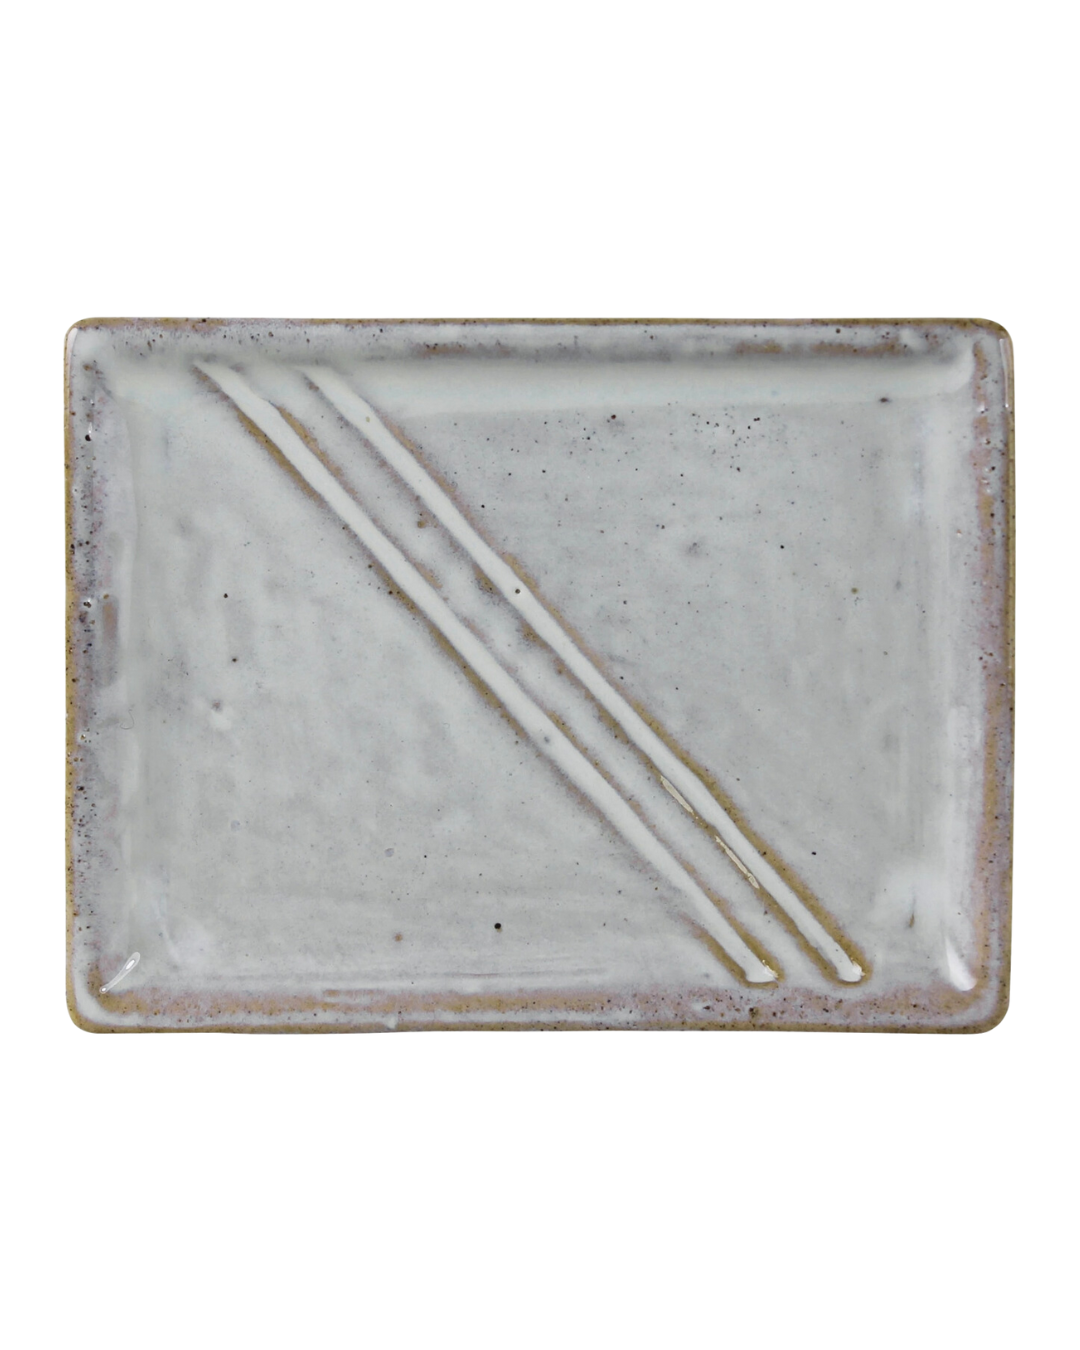 A rectangular Delta Tray Ceramic plate with a speckled finish and two thin, delicate HomArt chopsticks resting diagonally across it, isolated on a white background in Scottsdale, Arizona.